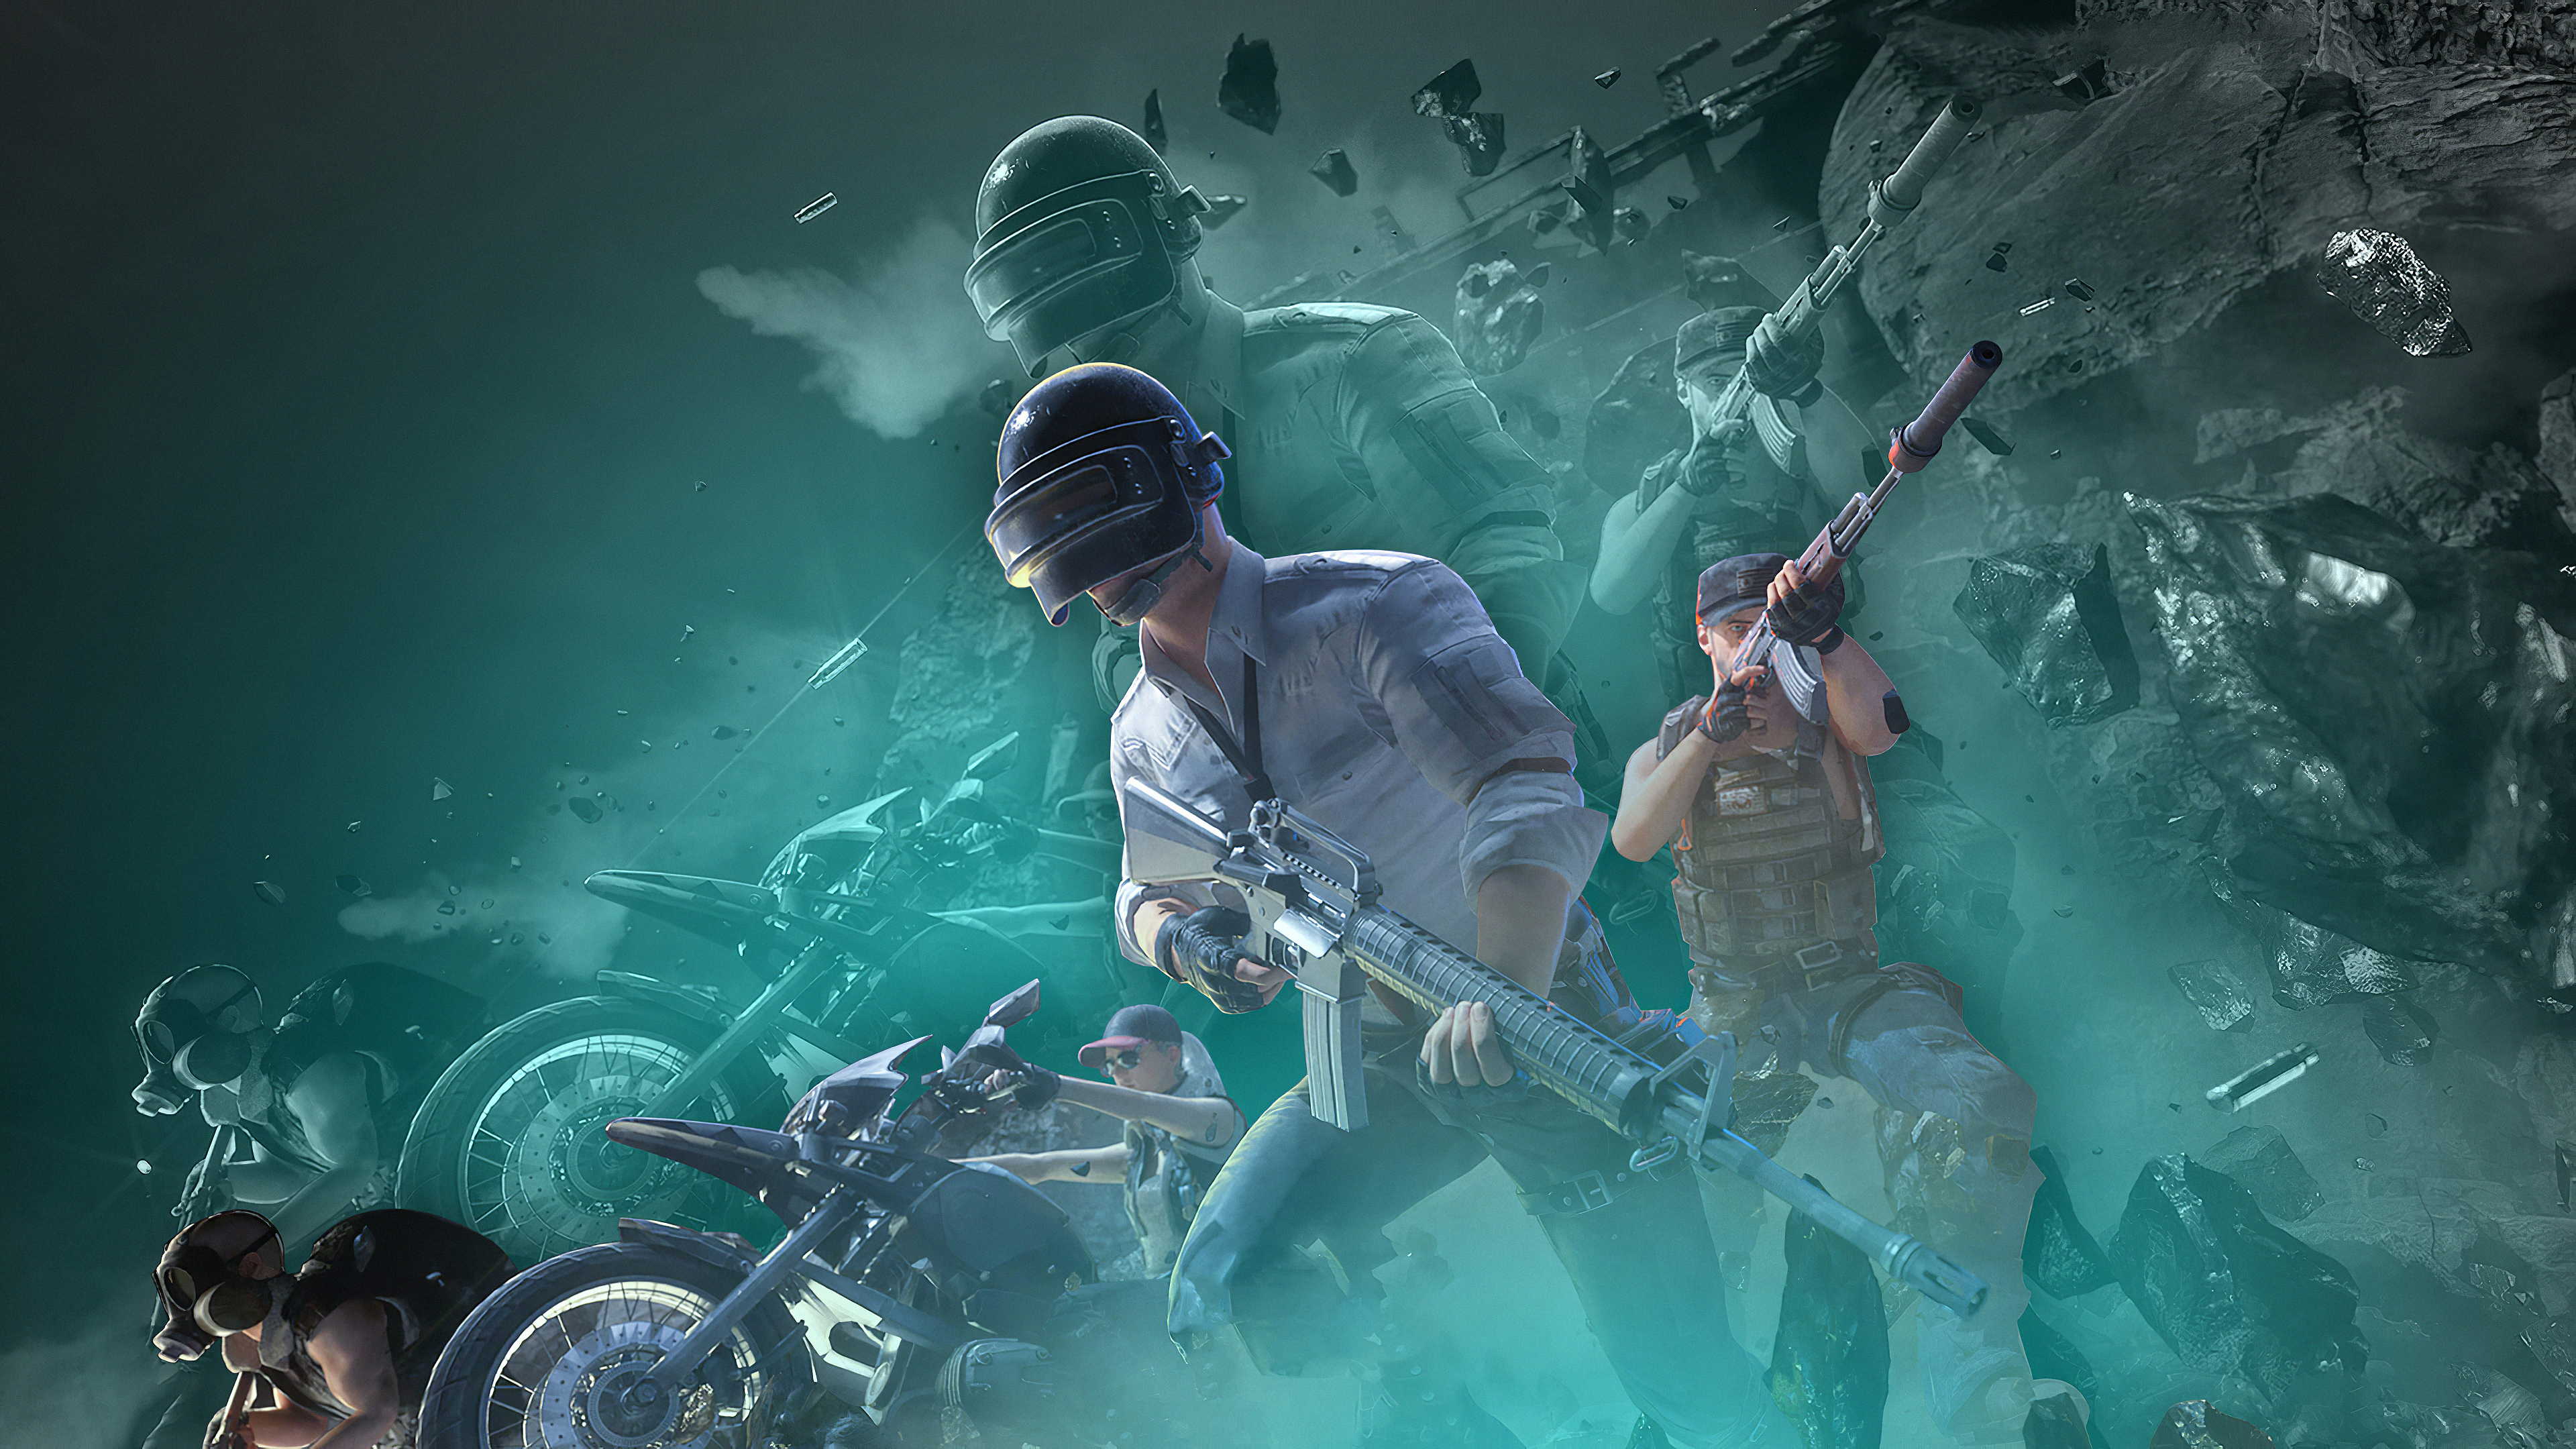 3840x Pubg Mobile Death Race Art 3840x Resolution Wallpaper Hd Games 4k Wallpapers Images Photos And Background Wallpapers Den